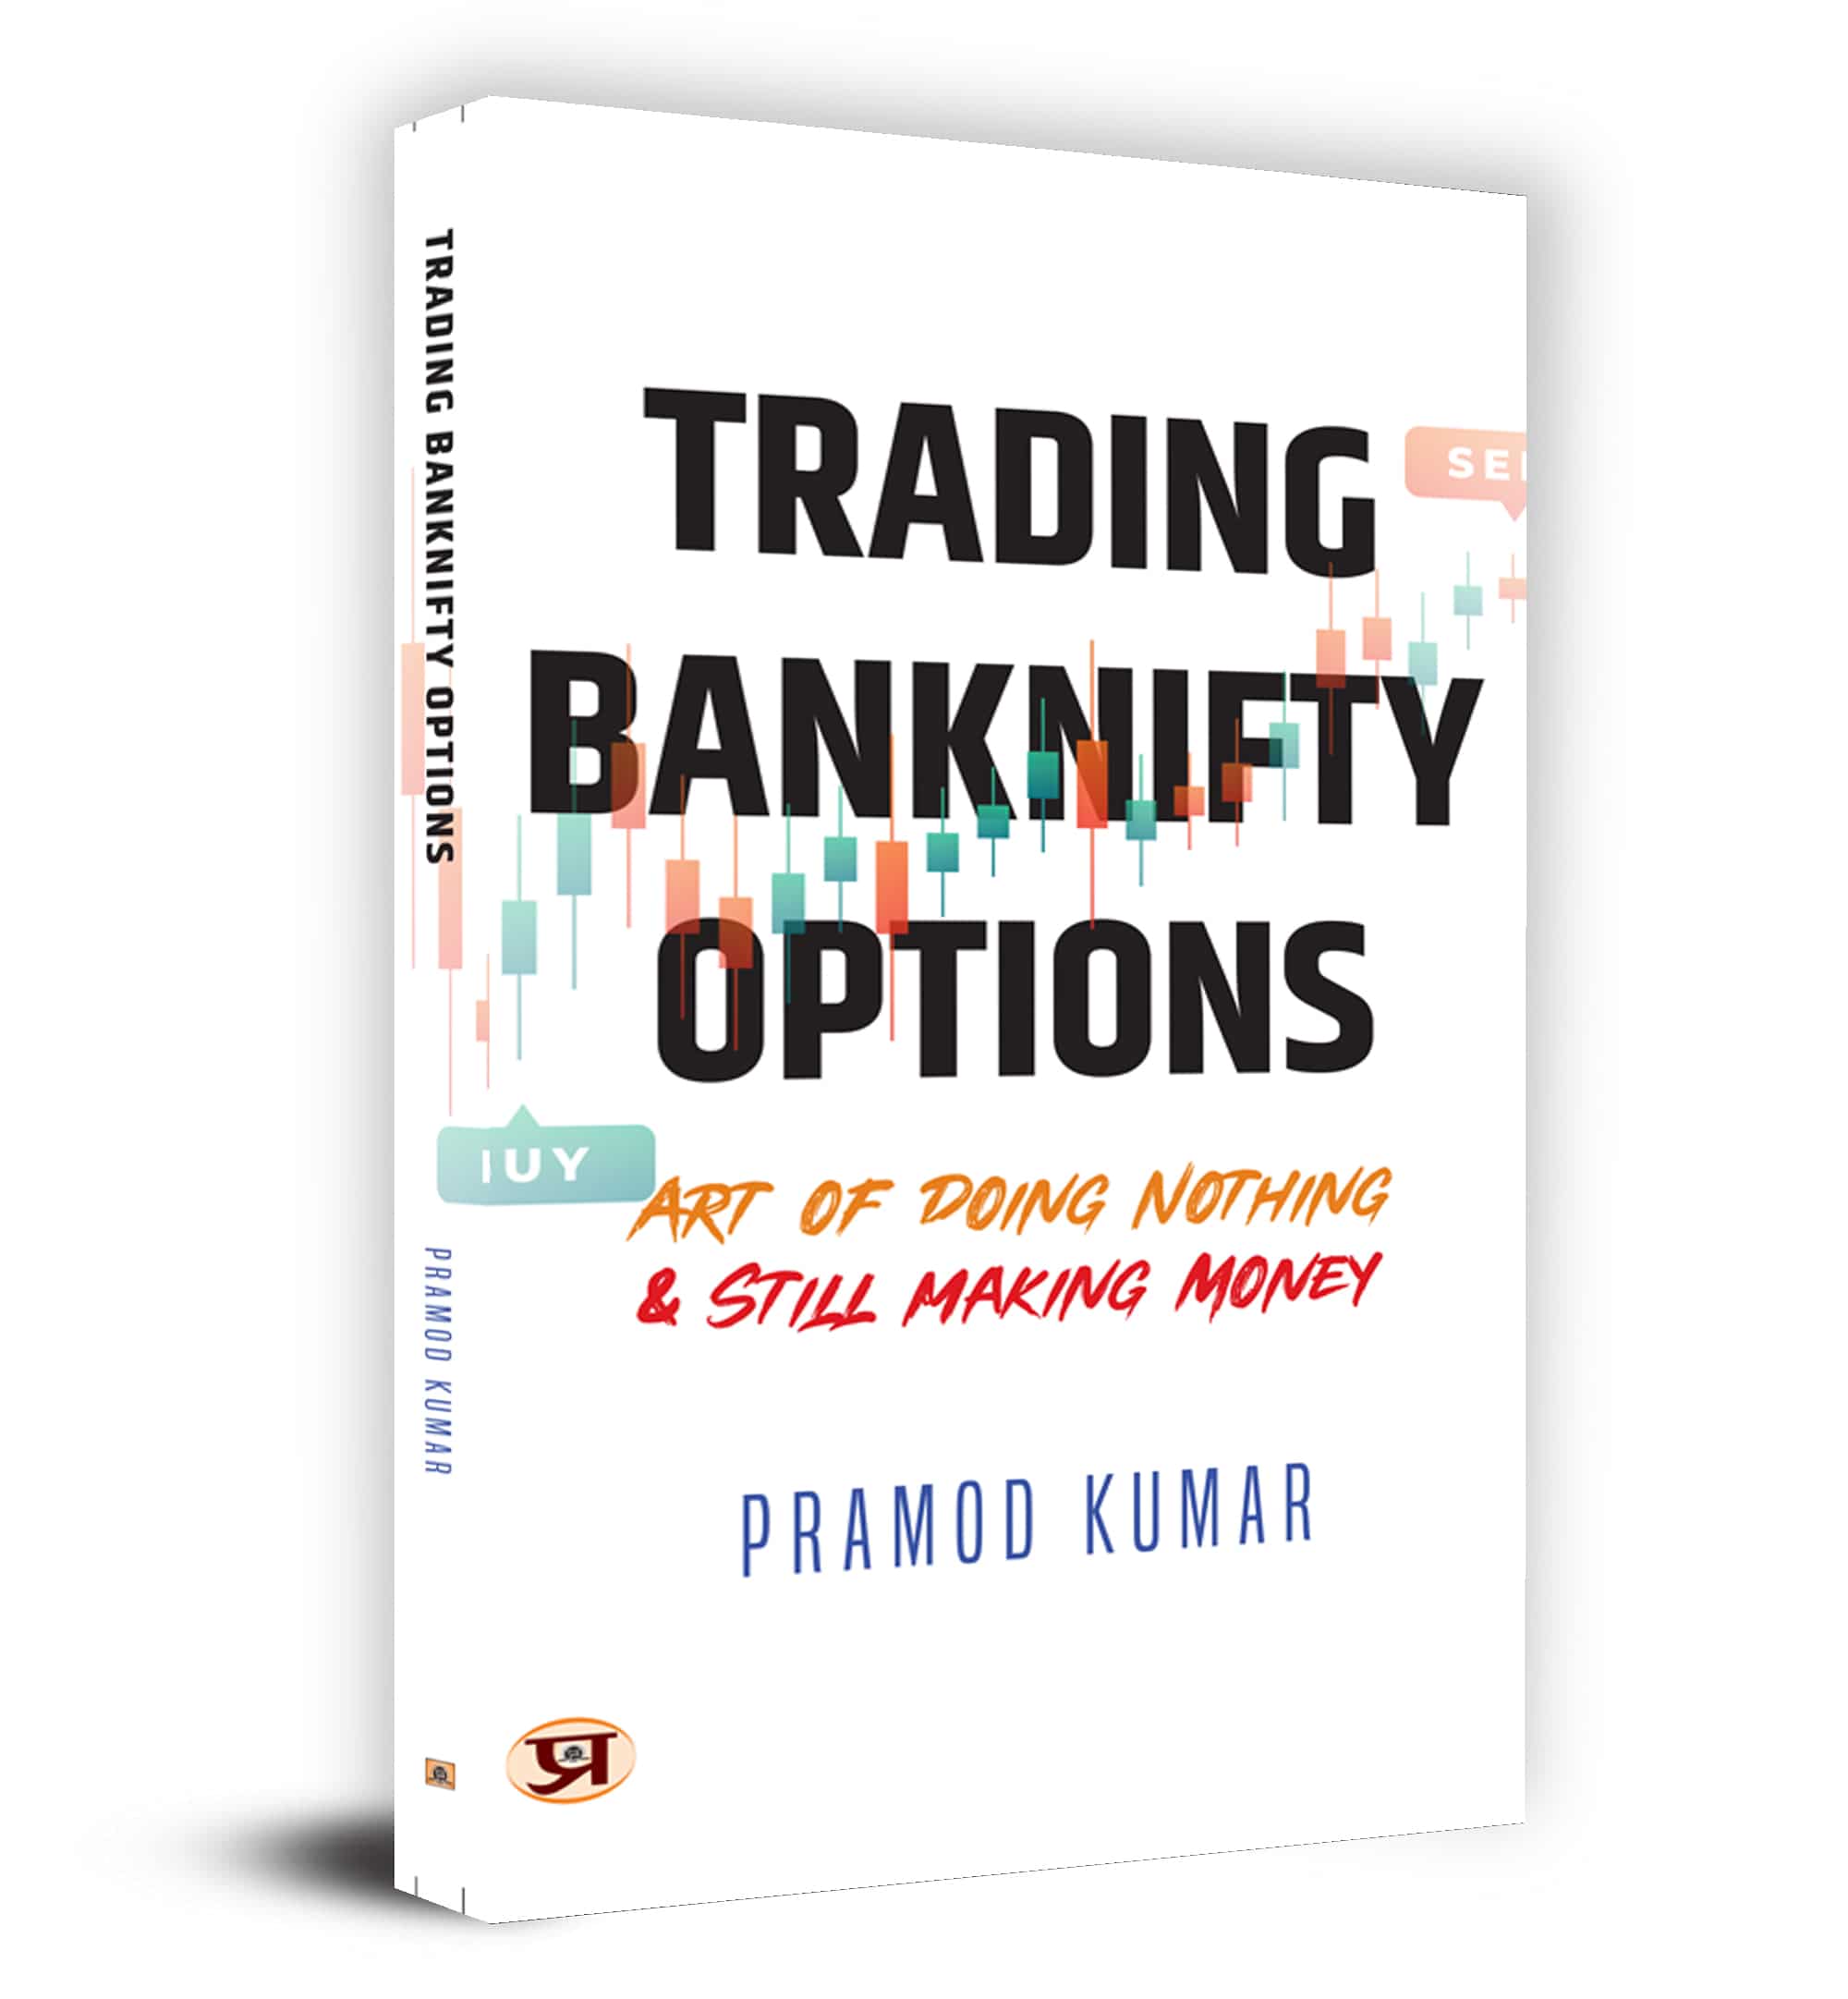 Trading Banknifty Options: Art Of Doing Nothing & Still Making Money Book in English